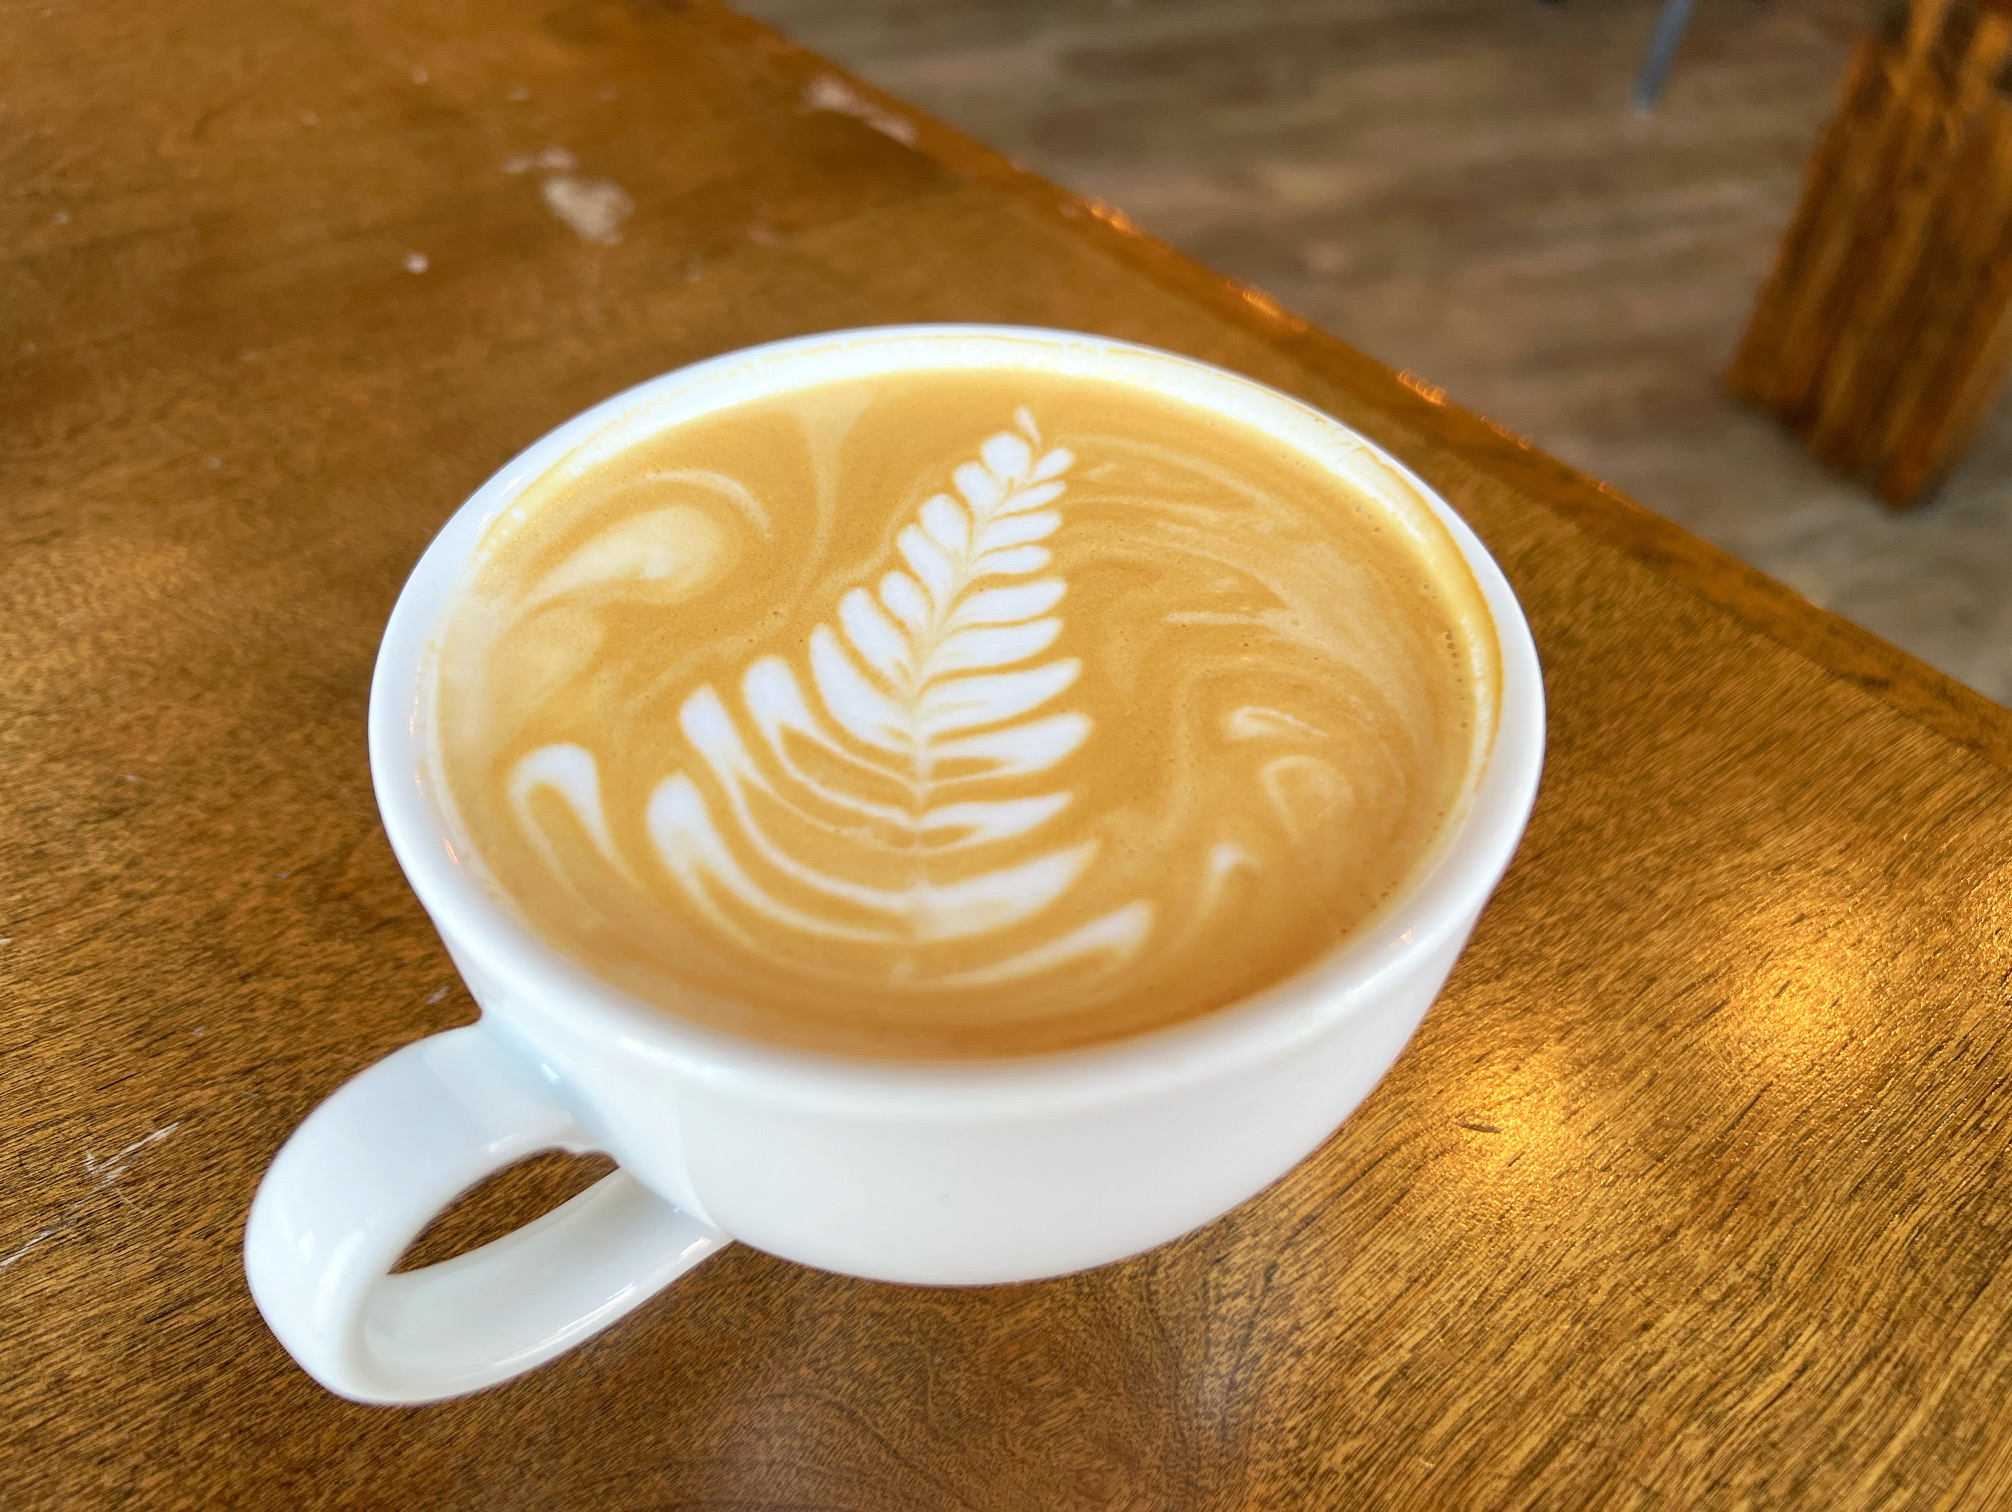 On a wooden table at Flying Machine Avionics, there is a harvest moon latte with a pretty foam design. Photo by Alyssa Buckley.